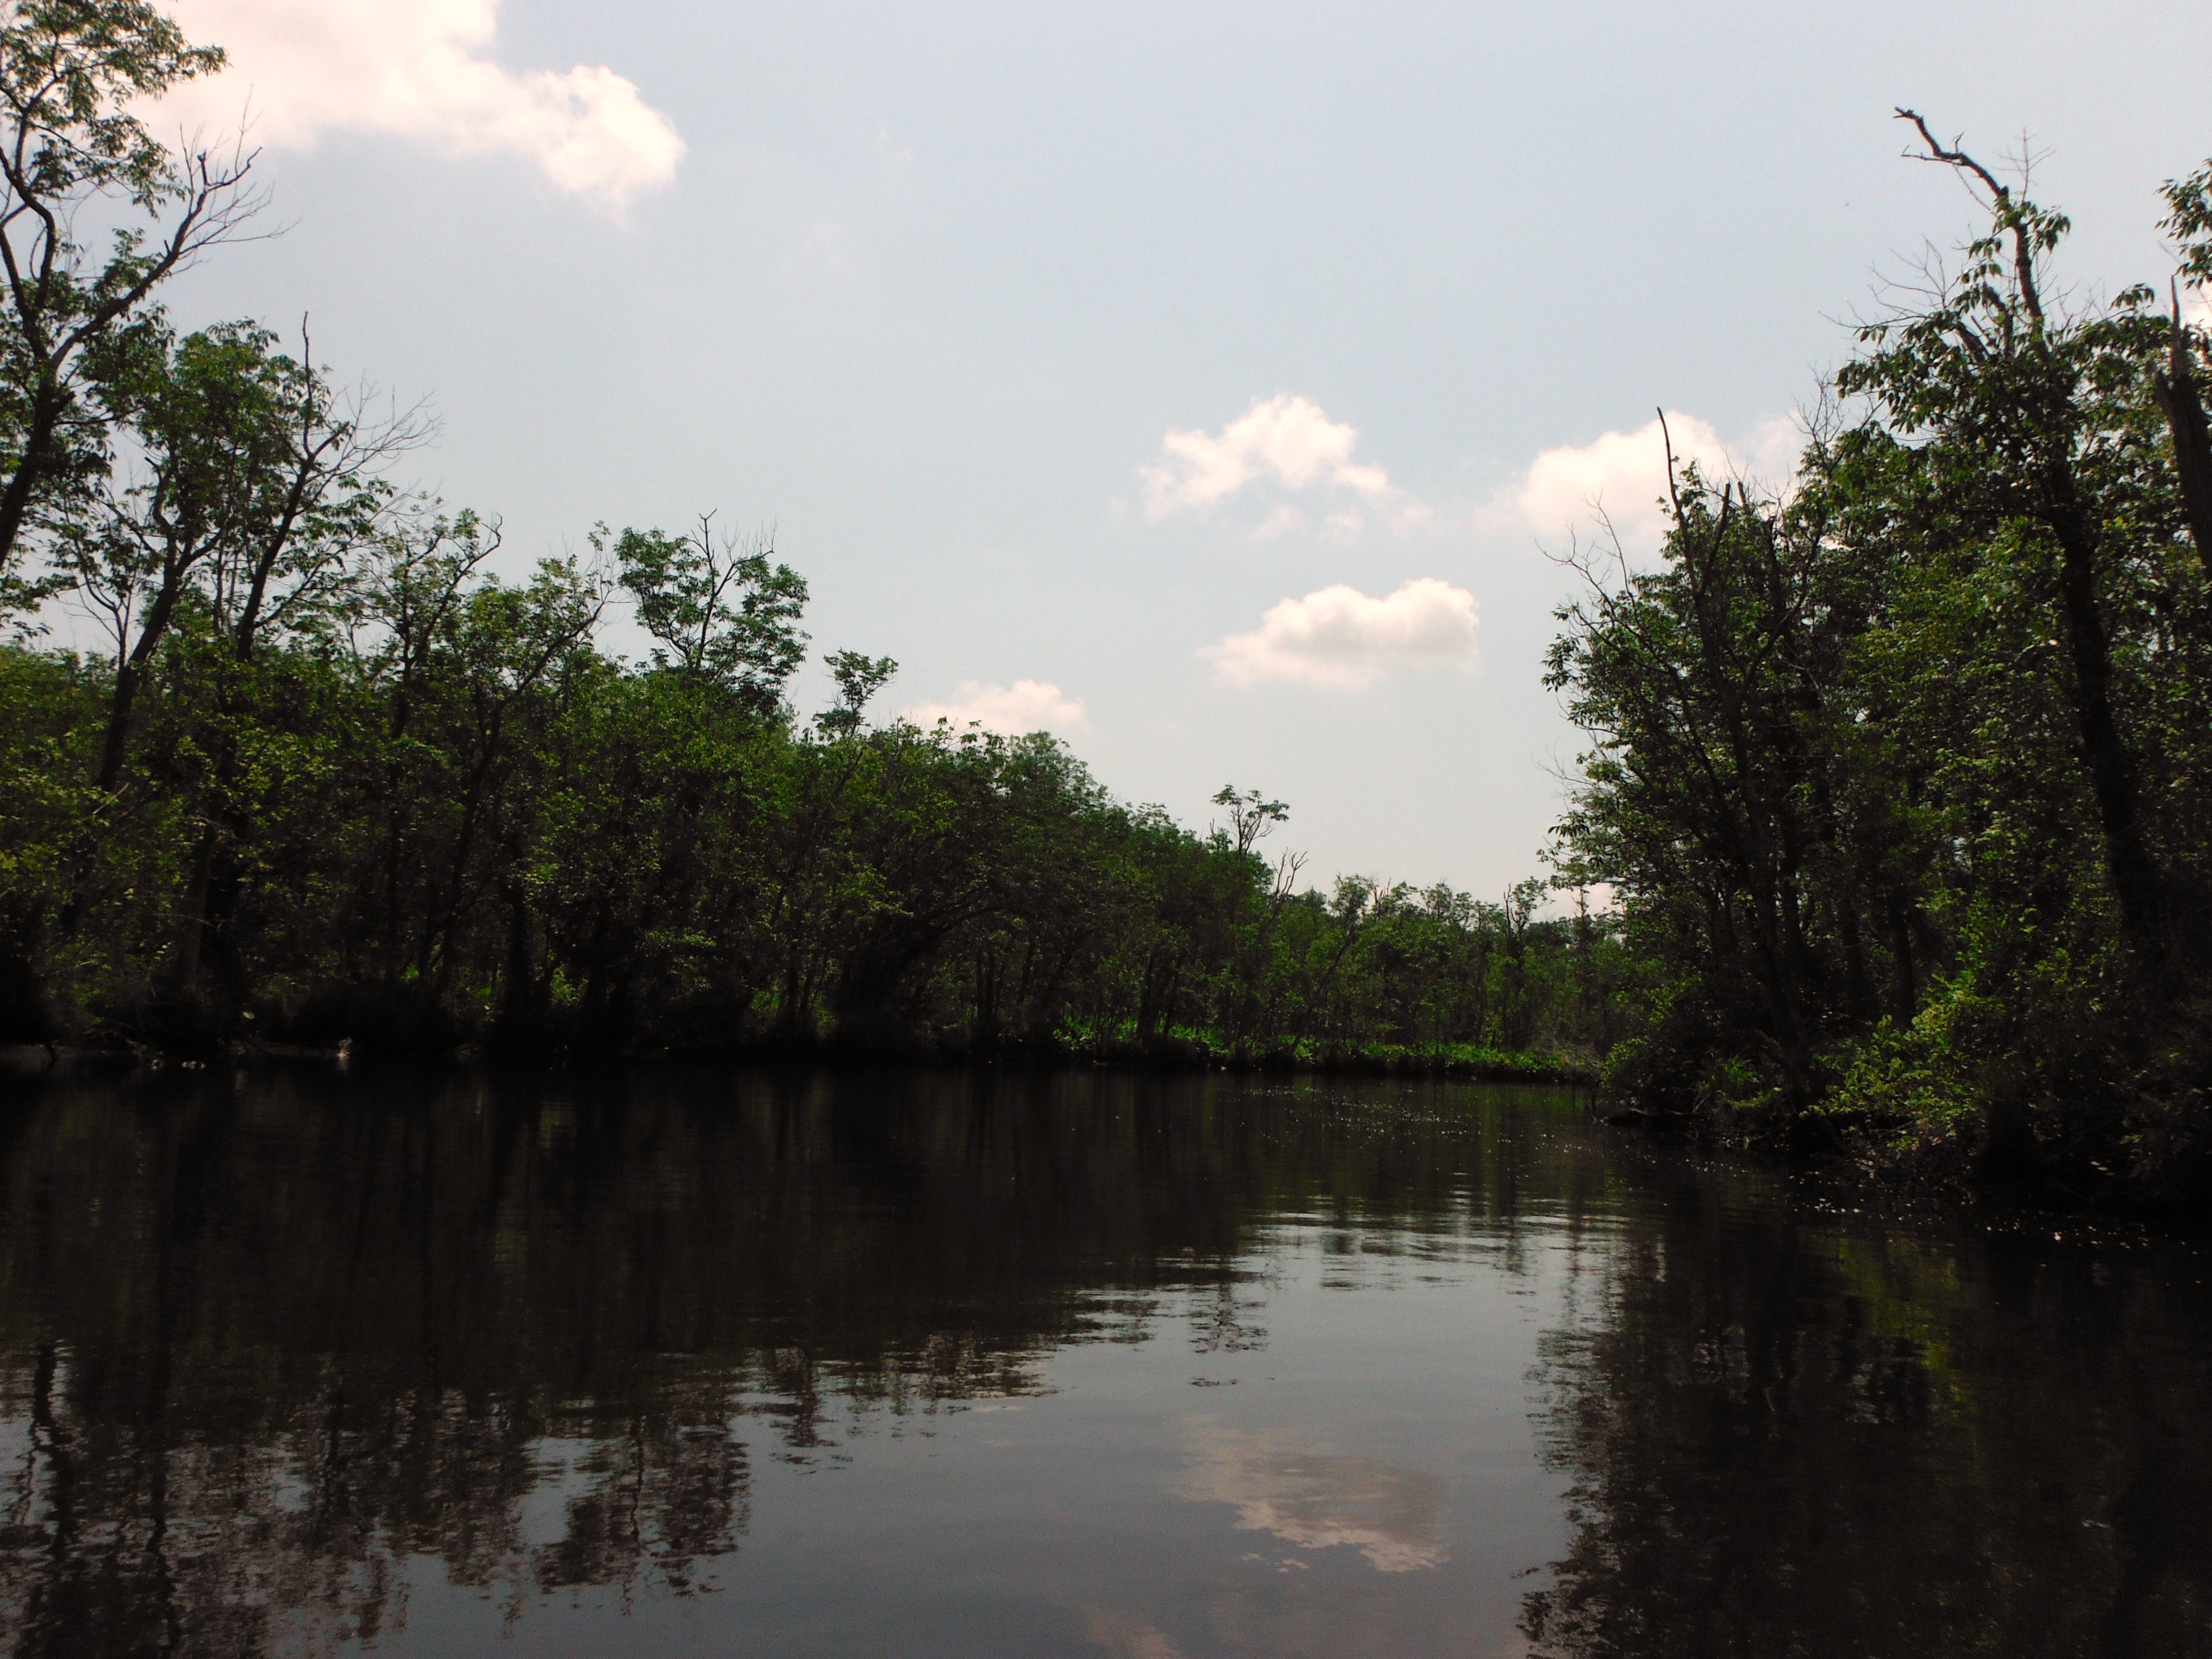 The Chicone paddle is very calm, once you enter the creek.